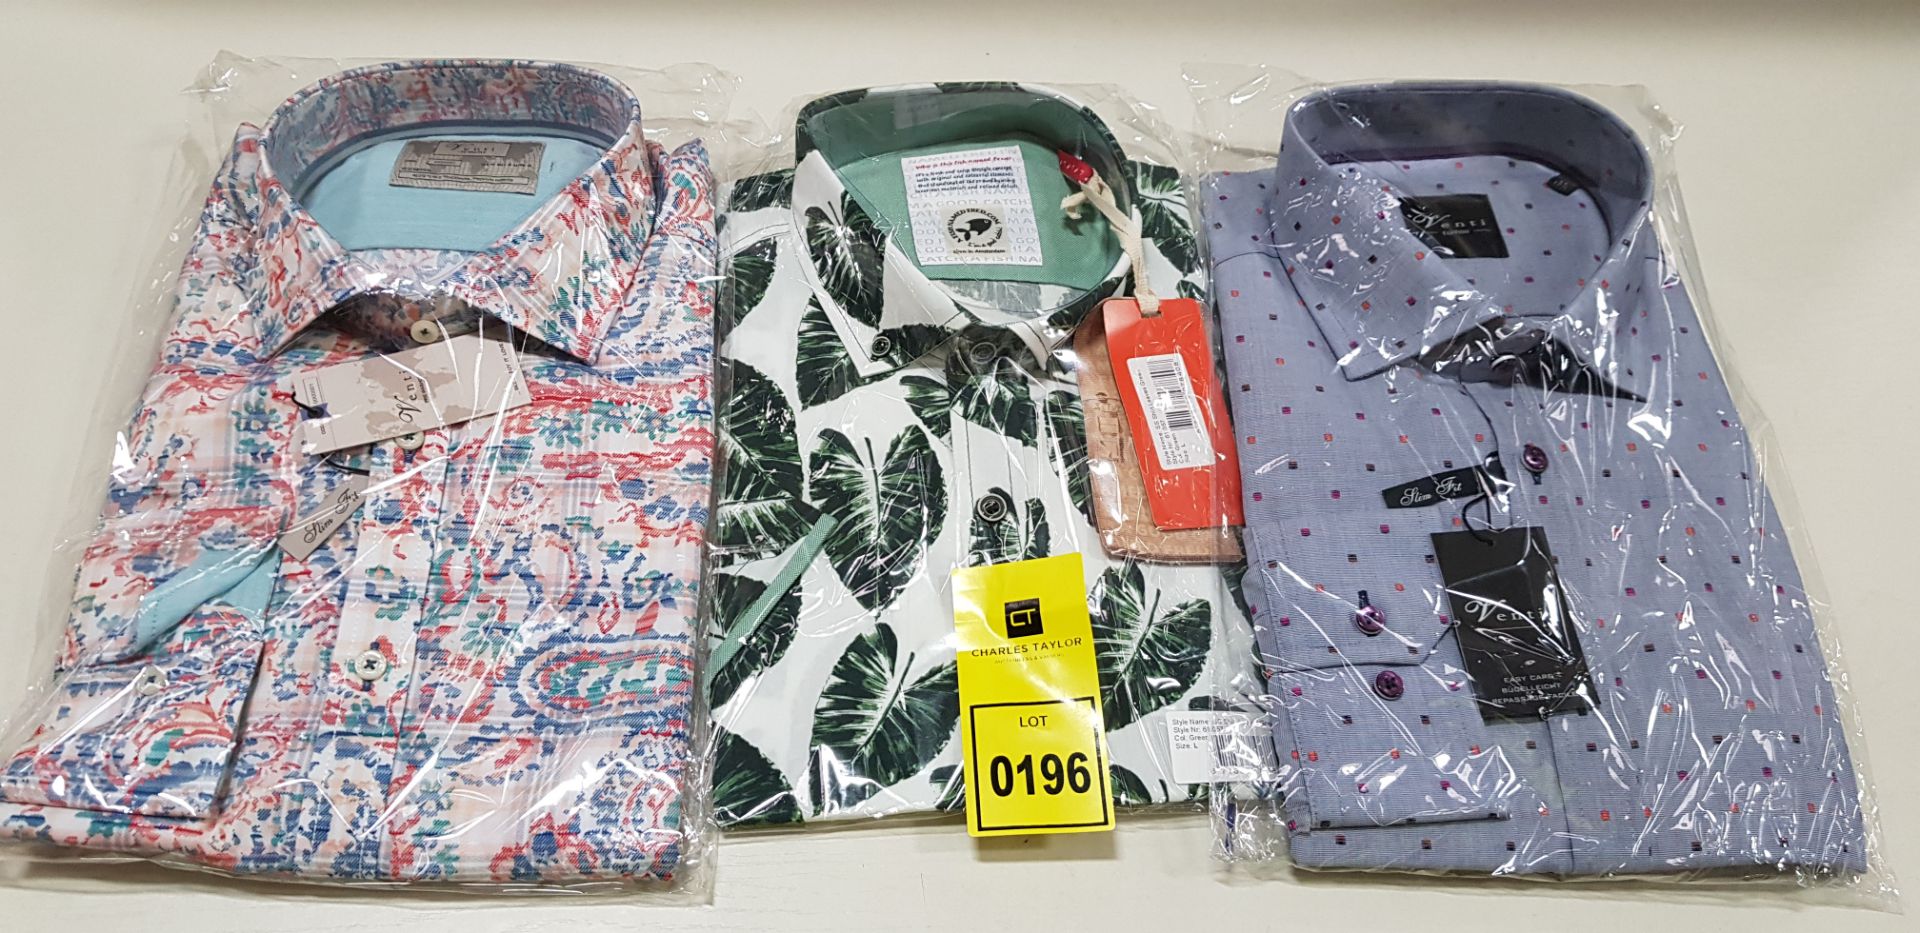 20 X BRAND NEW MENS DESIGNER BUTTONED SHIRTS IN VARIOUS STYLES AND SIZES IE A FISH NAMED FRED,